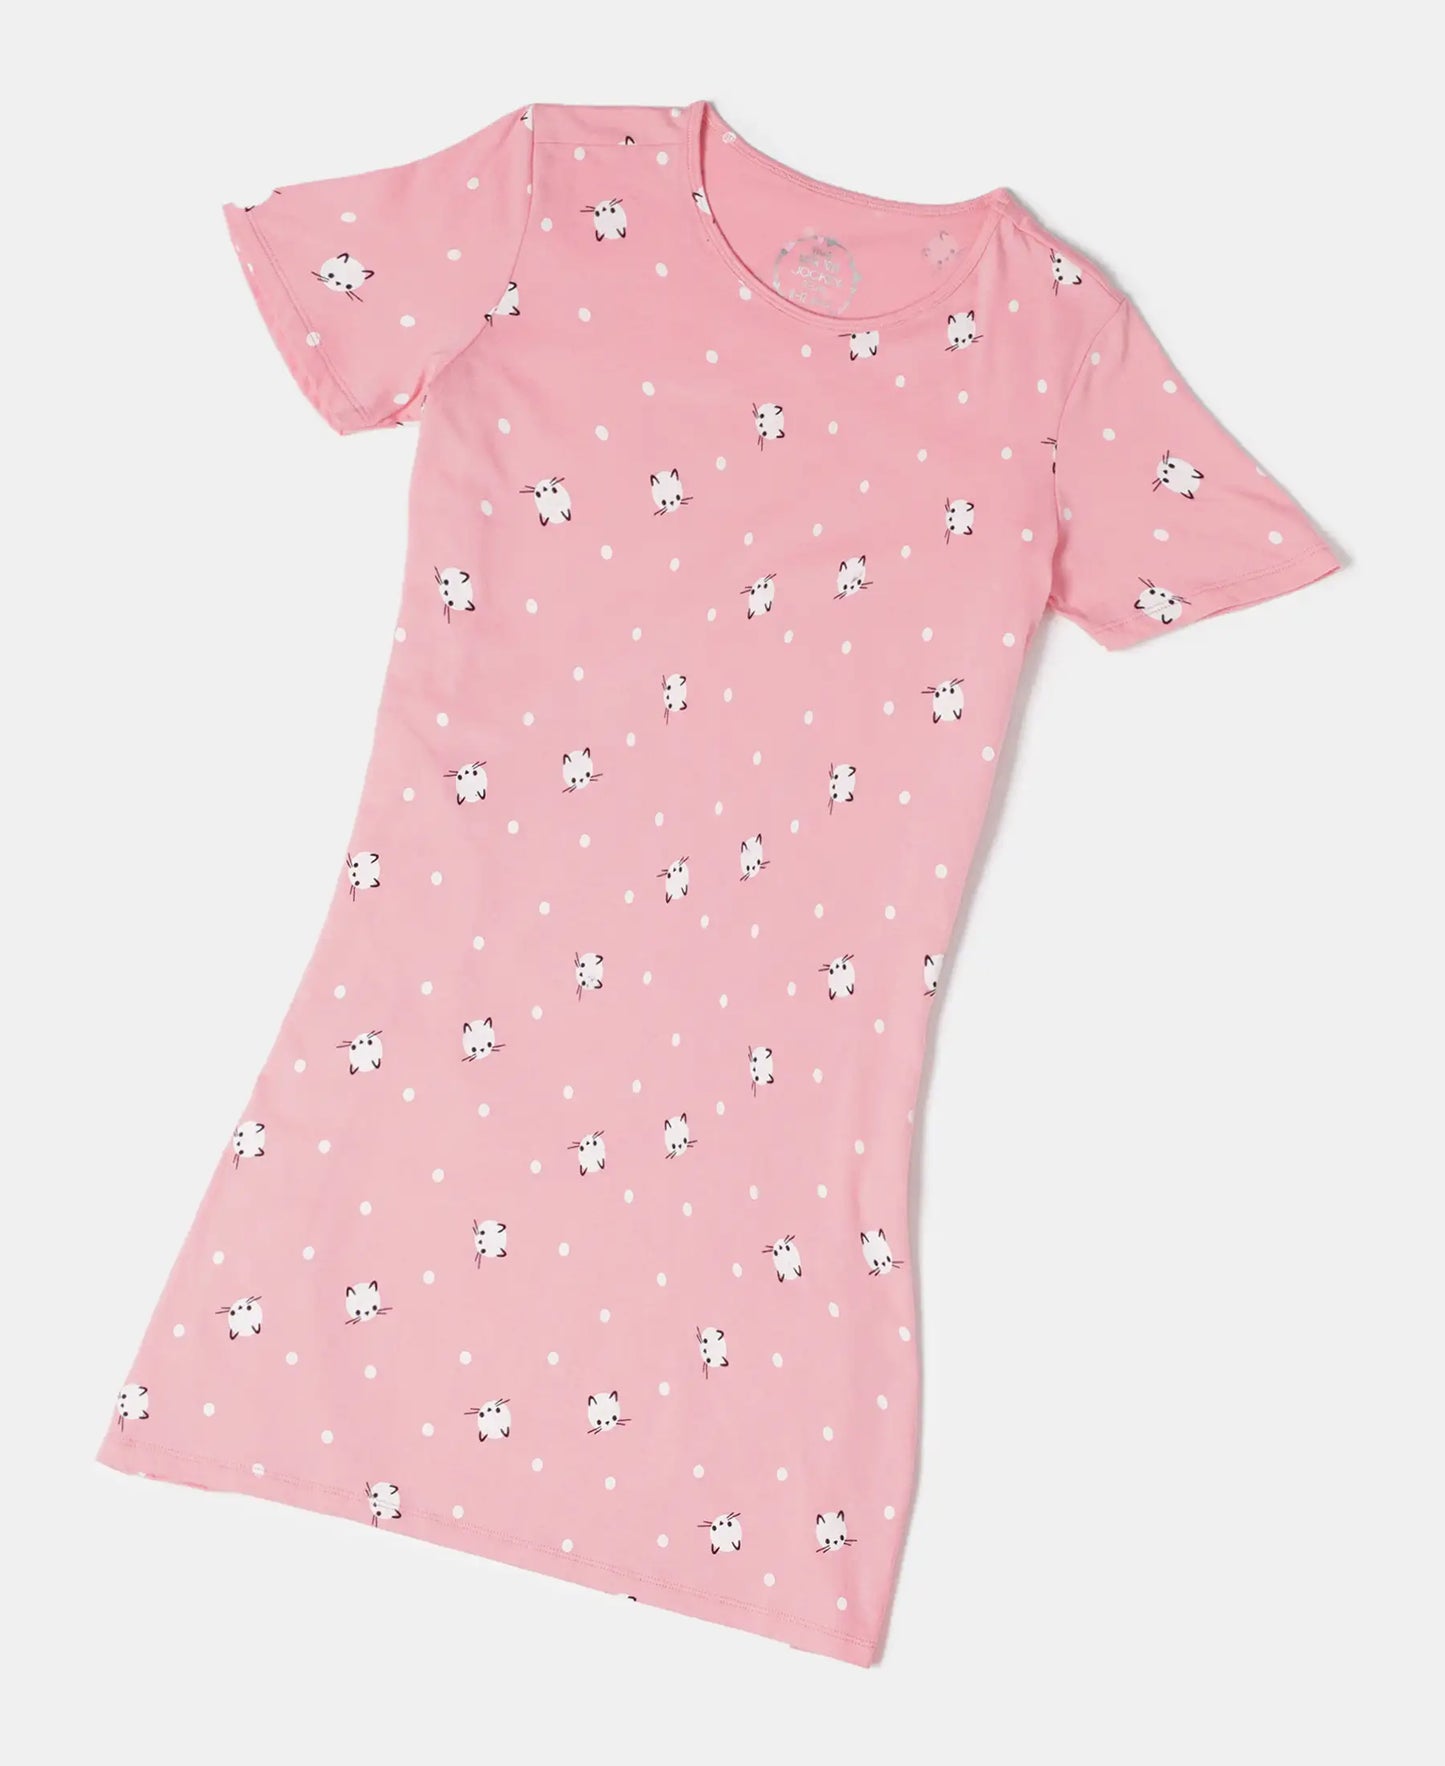 Super Combed Cotton Printed Dress with Matching Headband - Flamingo Pink-6